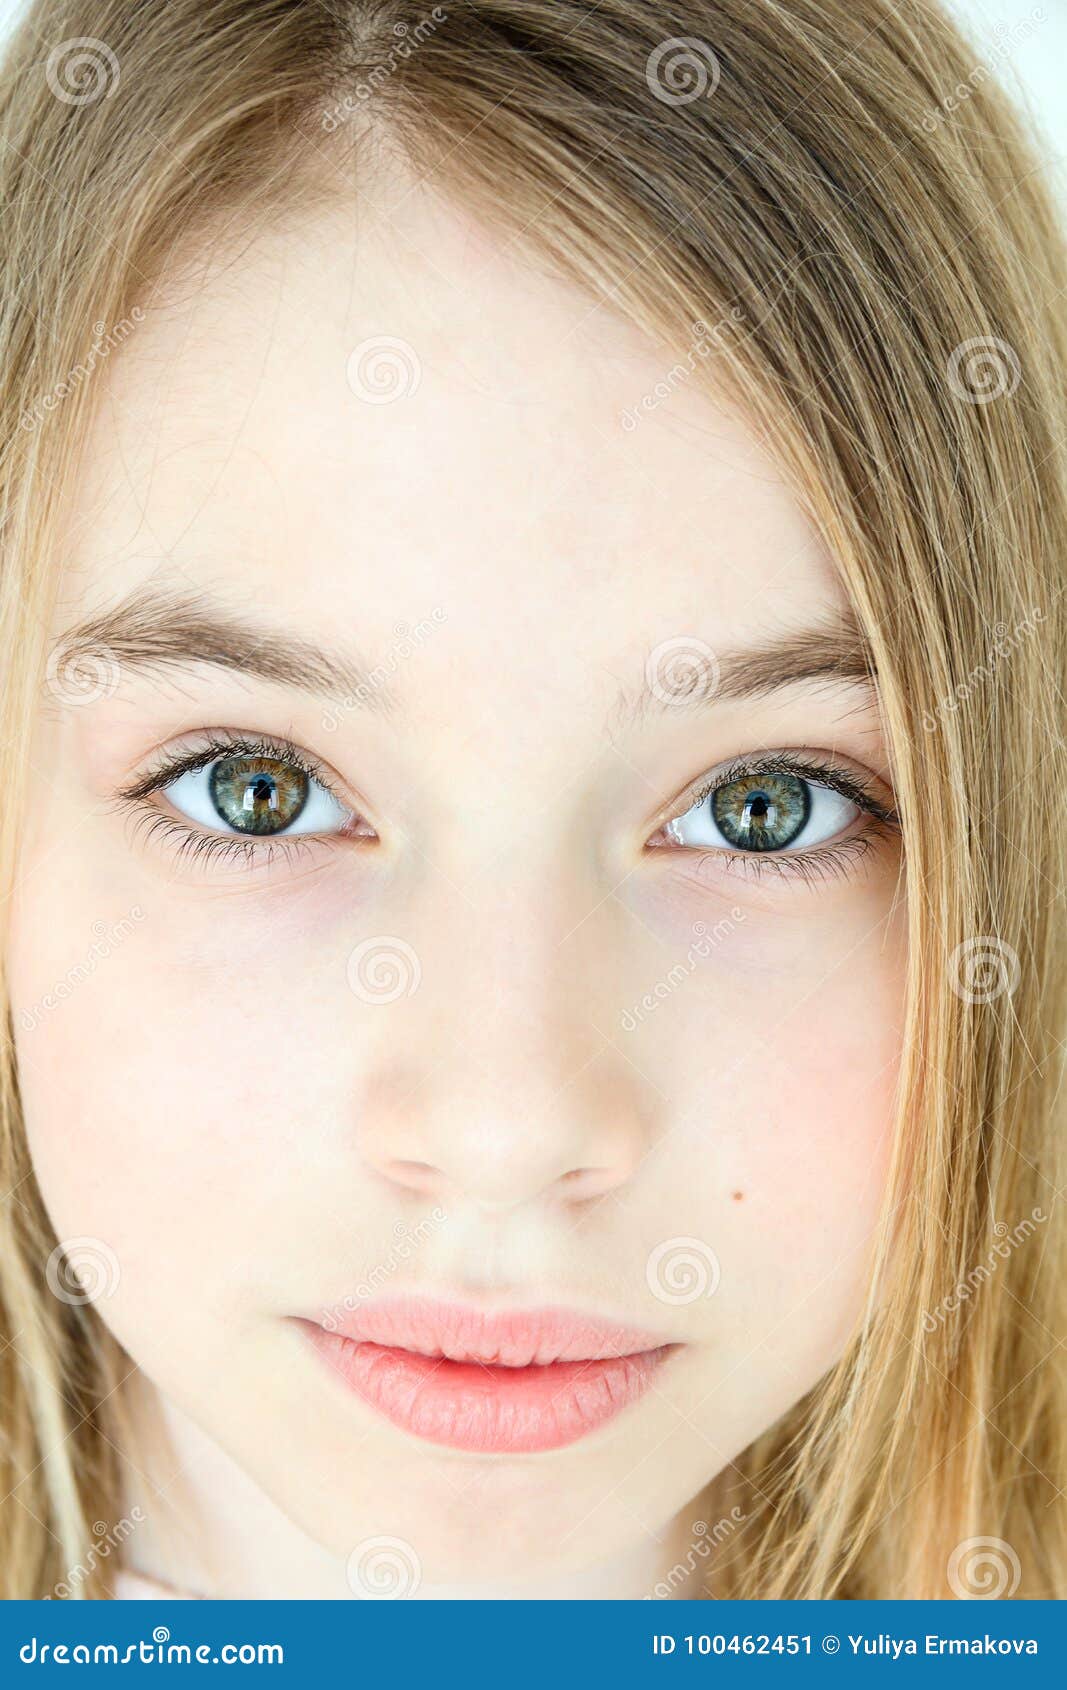 Cute Girls With Green Eyes